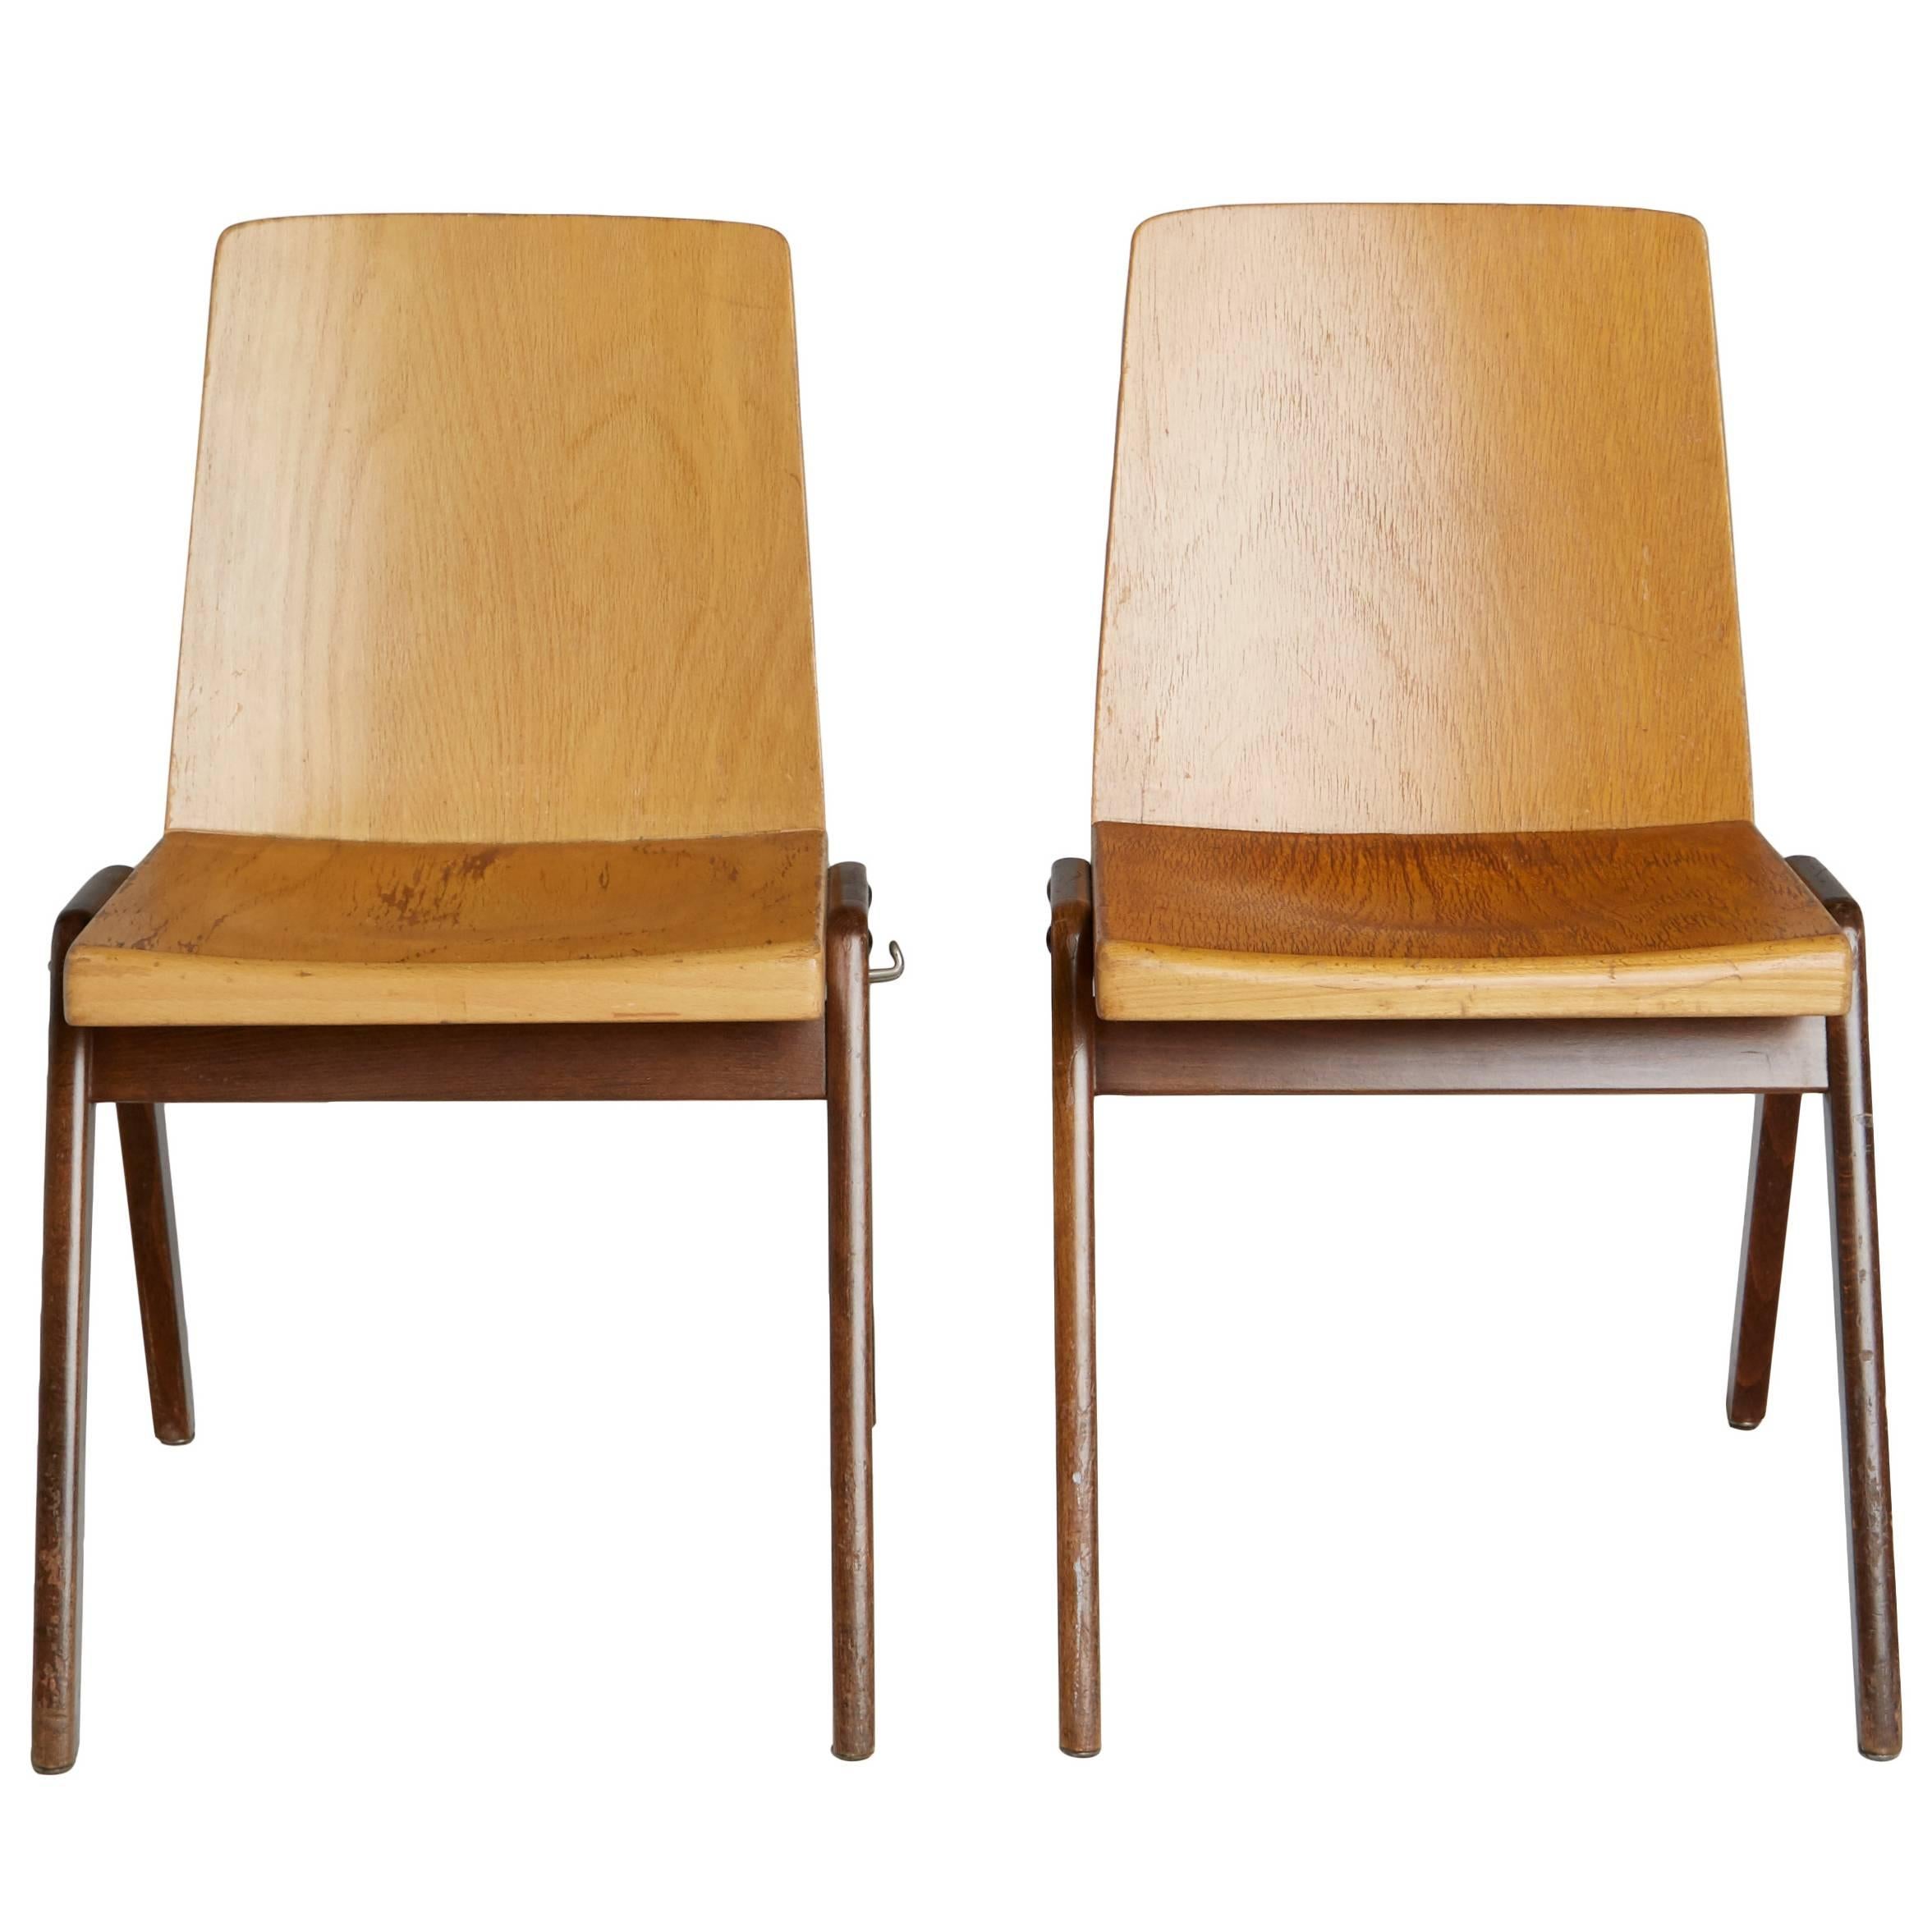 Wooden Stacking Chairs by Thonet - ON SALE